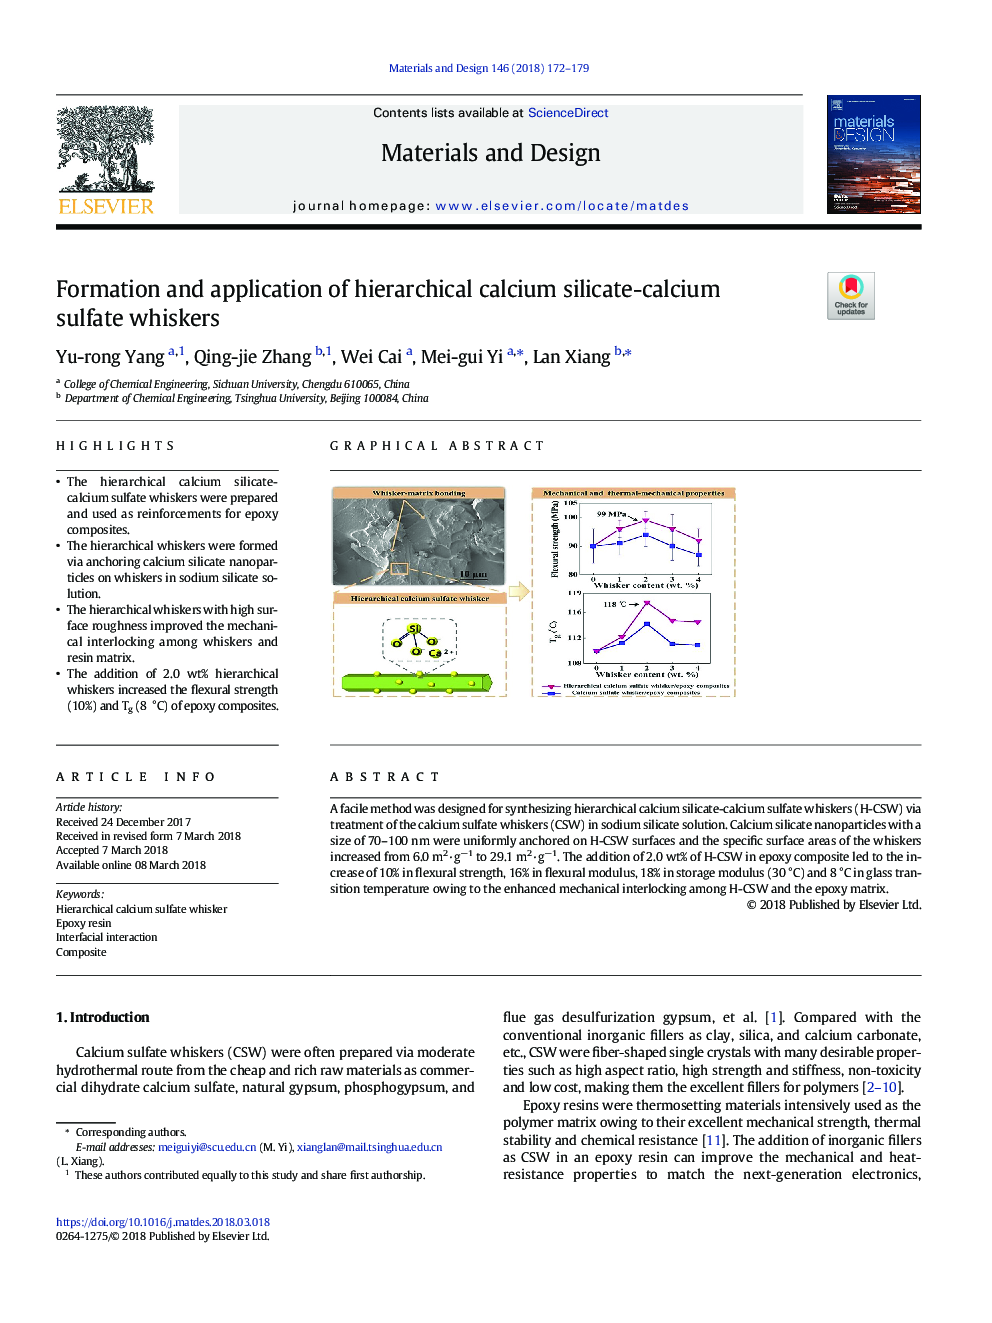 Formation and application of hierarchical calcium silicate-calcium sulfate whiskers